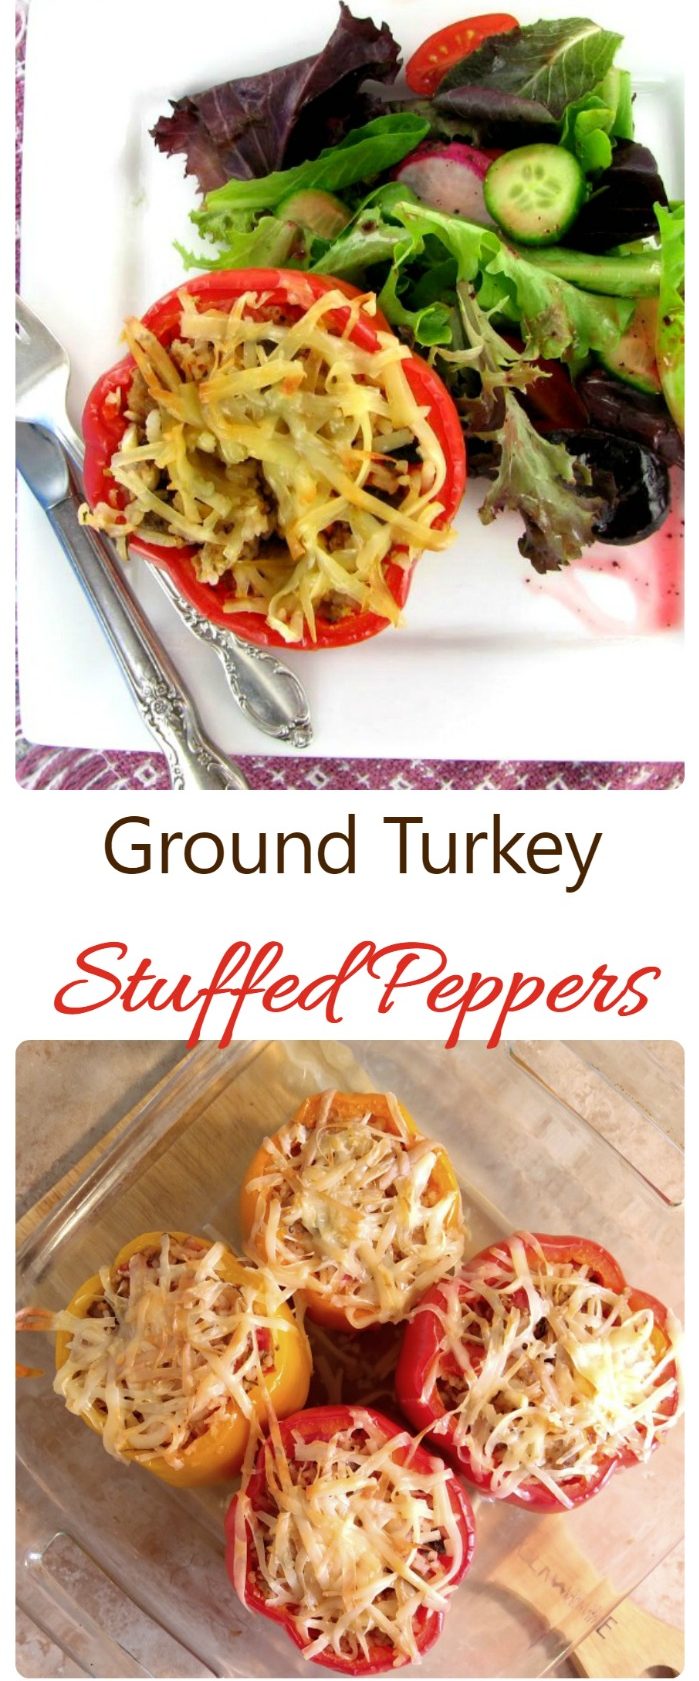 These Ground Turkey Stuffed Peppers are the ultimate healthy comfort food recipe. They use jasmine rice and coconut as a filler and taste just amazing!